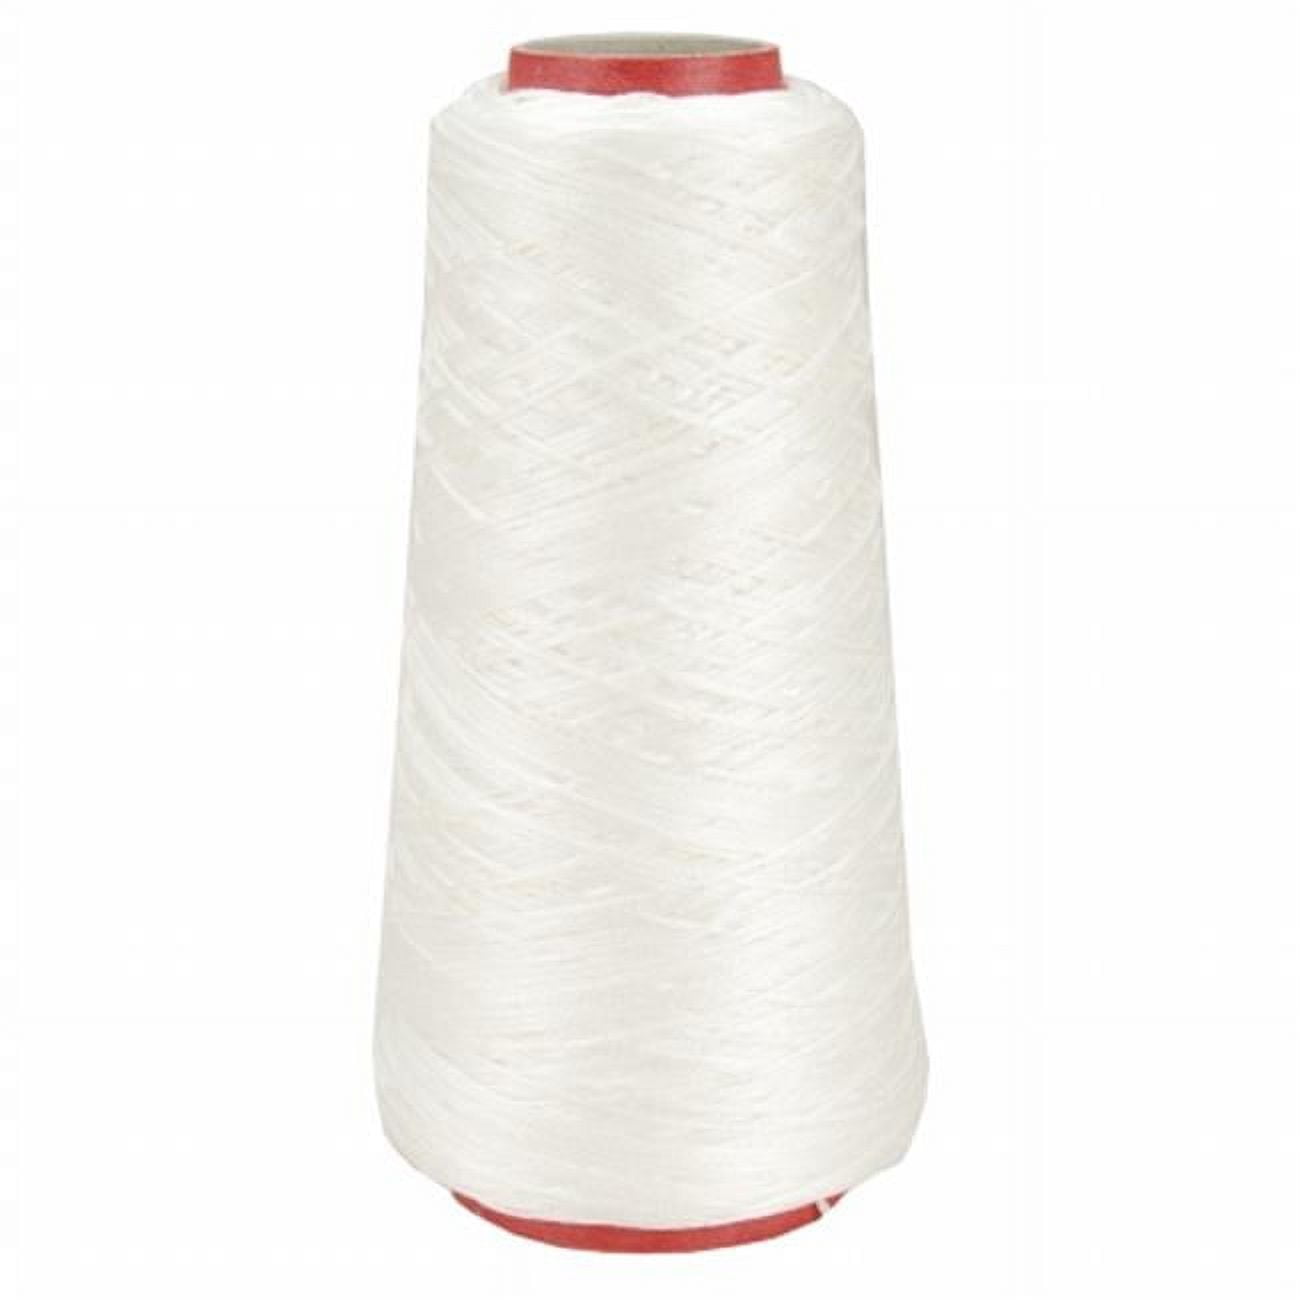 RAPOS-1 Bright White Embroidery Thread Cone – 5000 Meters